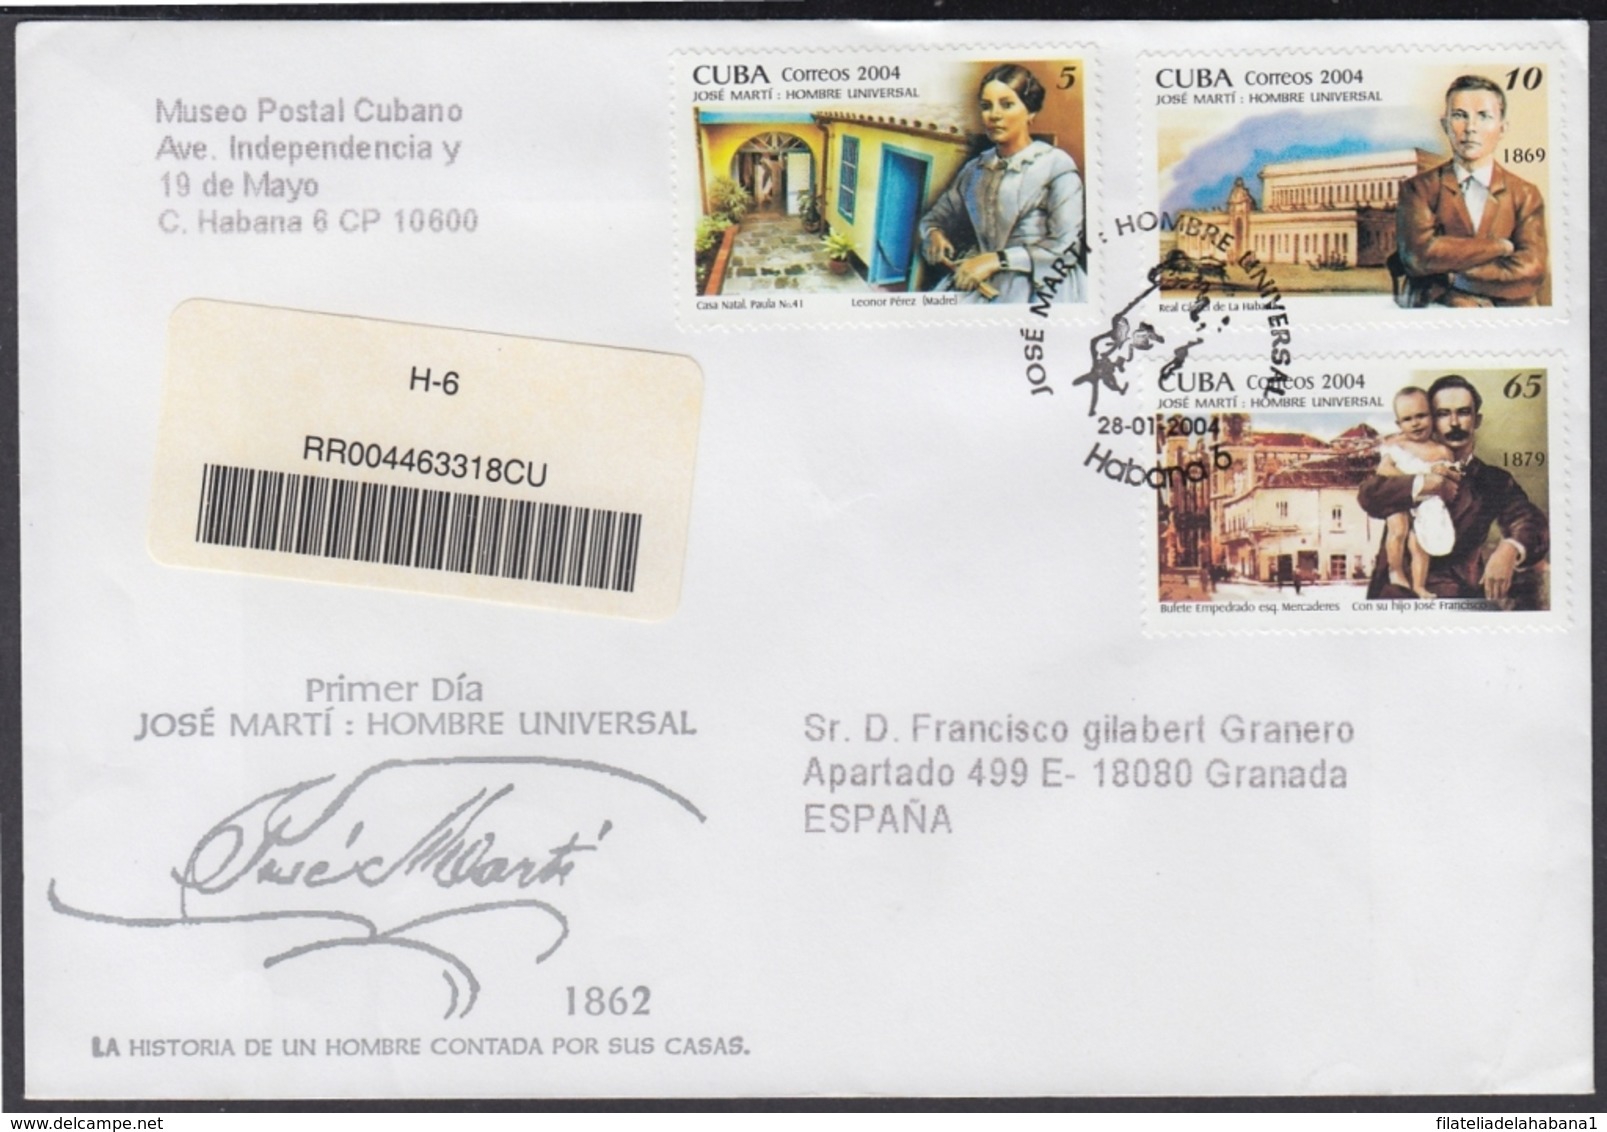 2004-FDC-31 CUBA FDC 2004. REGISTERED COVER TO SPAIN. JOSE MARTI, HOMBRE UNIVERSAL, INDEPENDENCE WAR. - FDC